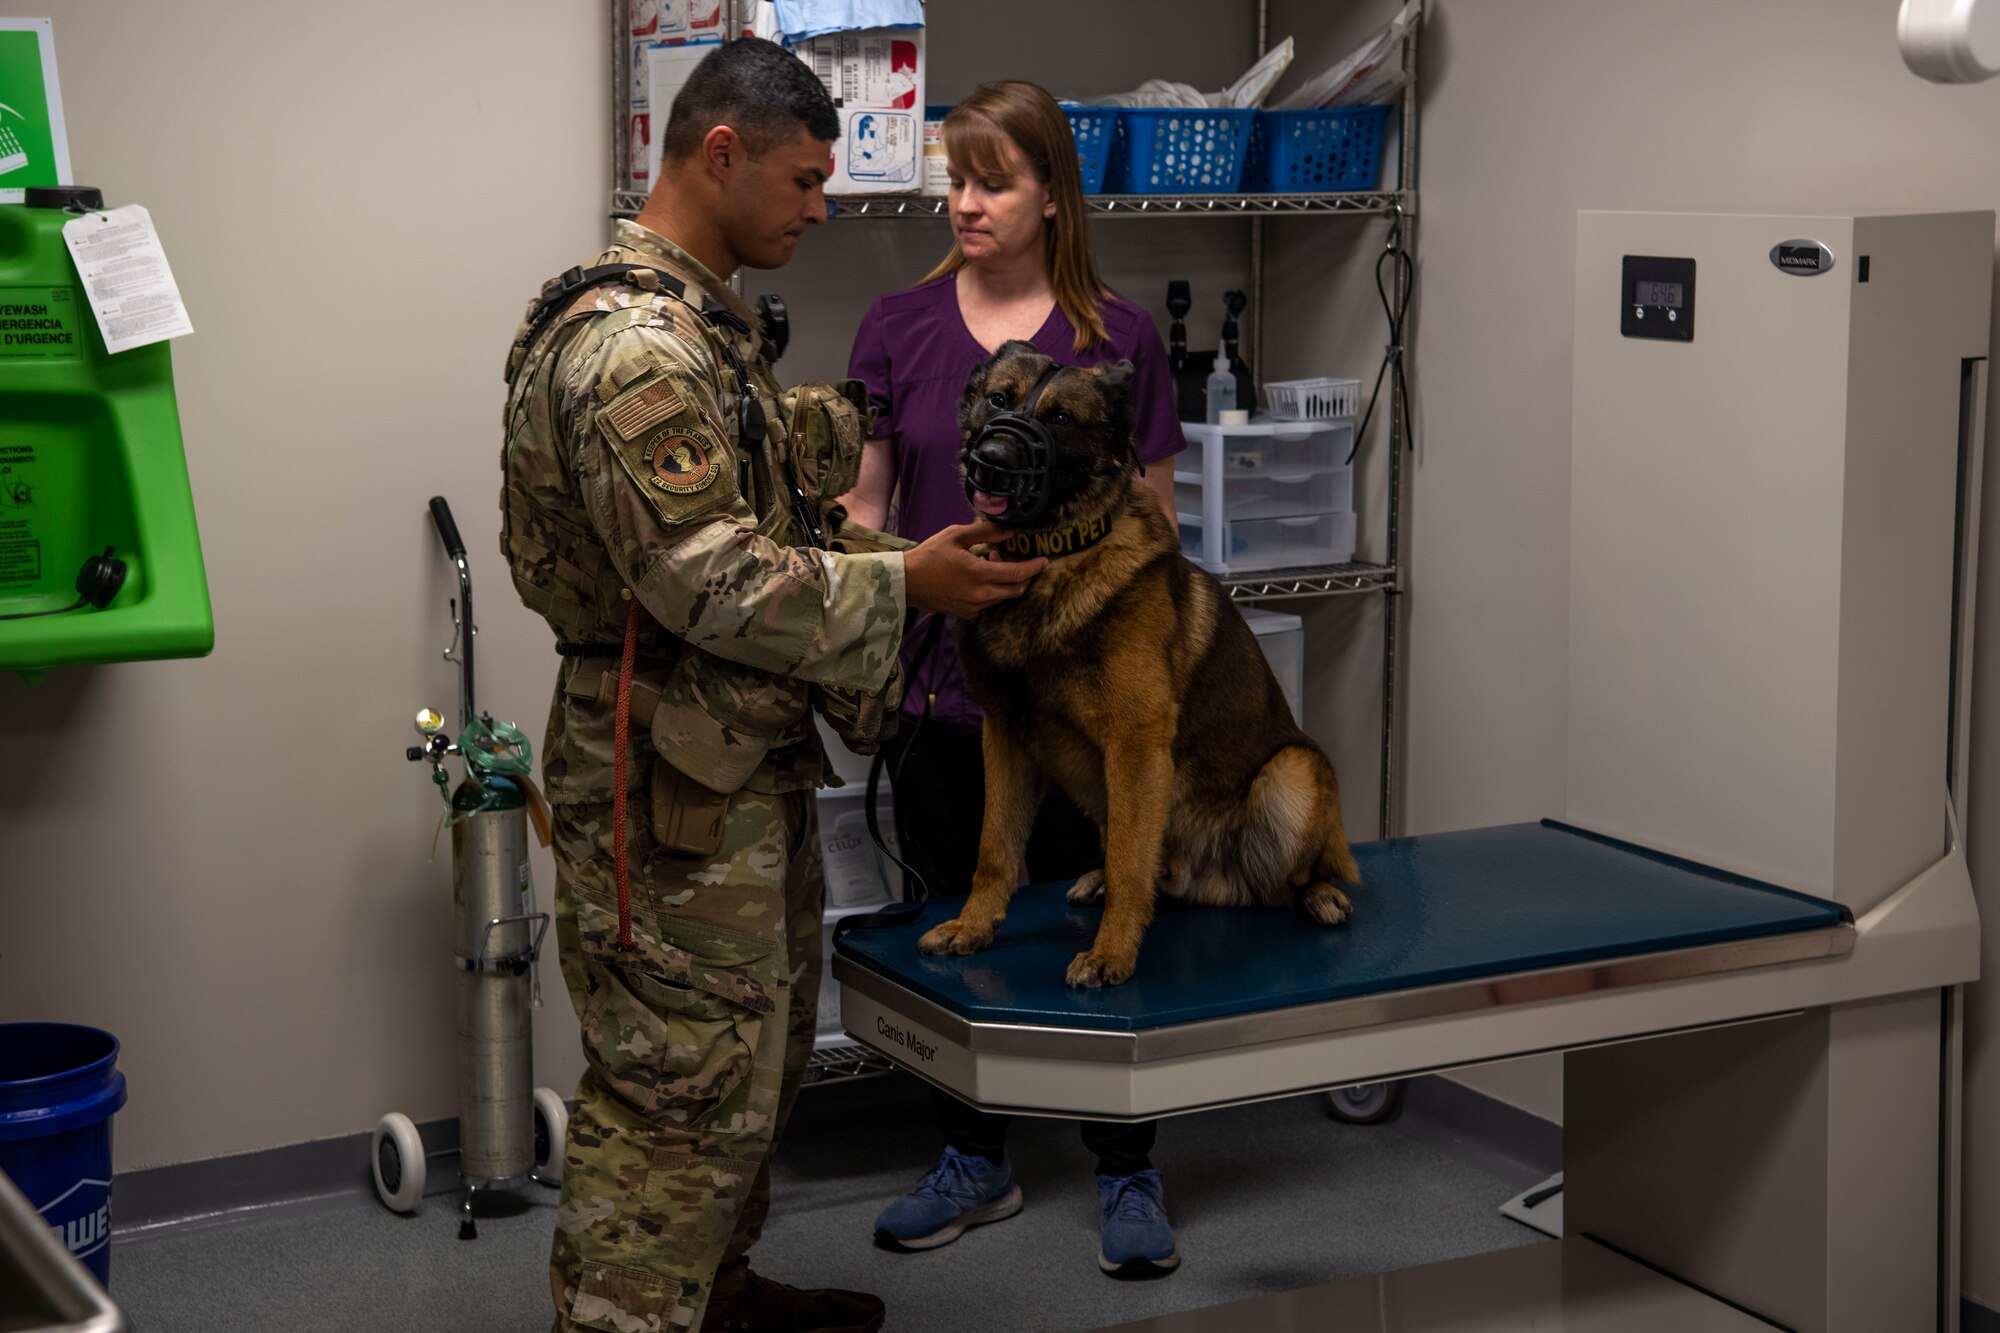 Senior Airman Joseph Fox, 22nd Security Forces Squadron military working dog handler, calms his military working dog Sani as she is prepped for an eye exam at the veterinary clinic May 30, 2023, at McConnell Air Force Base, Kansas. This exam is part of the American College of Veterinary Ophthalmologist/Epicur Pharma’s National Service Animal Eye Exam, which provides free eye exams for military working dogs to identify abnormalities that could affect vision and ability to perform their duties. (U.S. Air Force Photo by Airman Gavin Hameed)